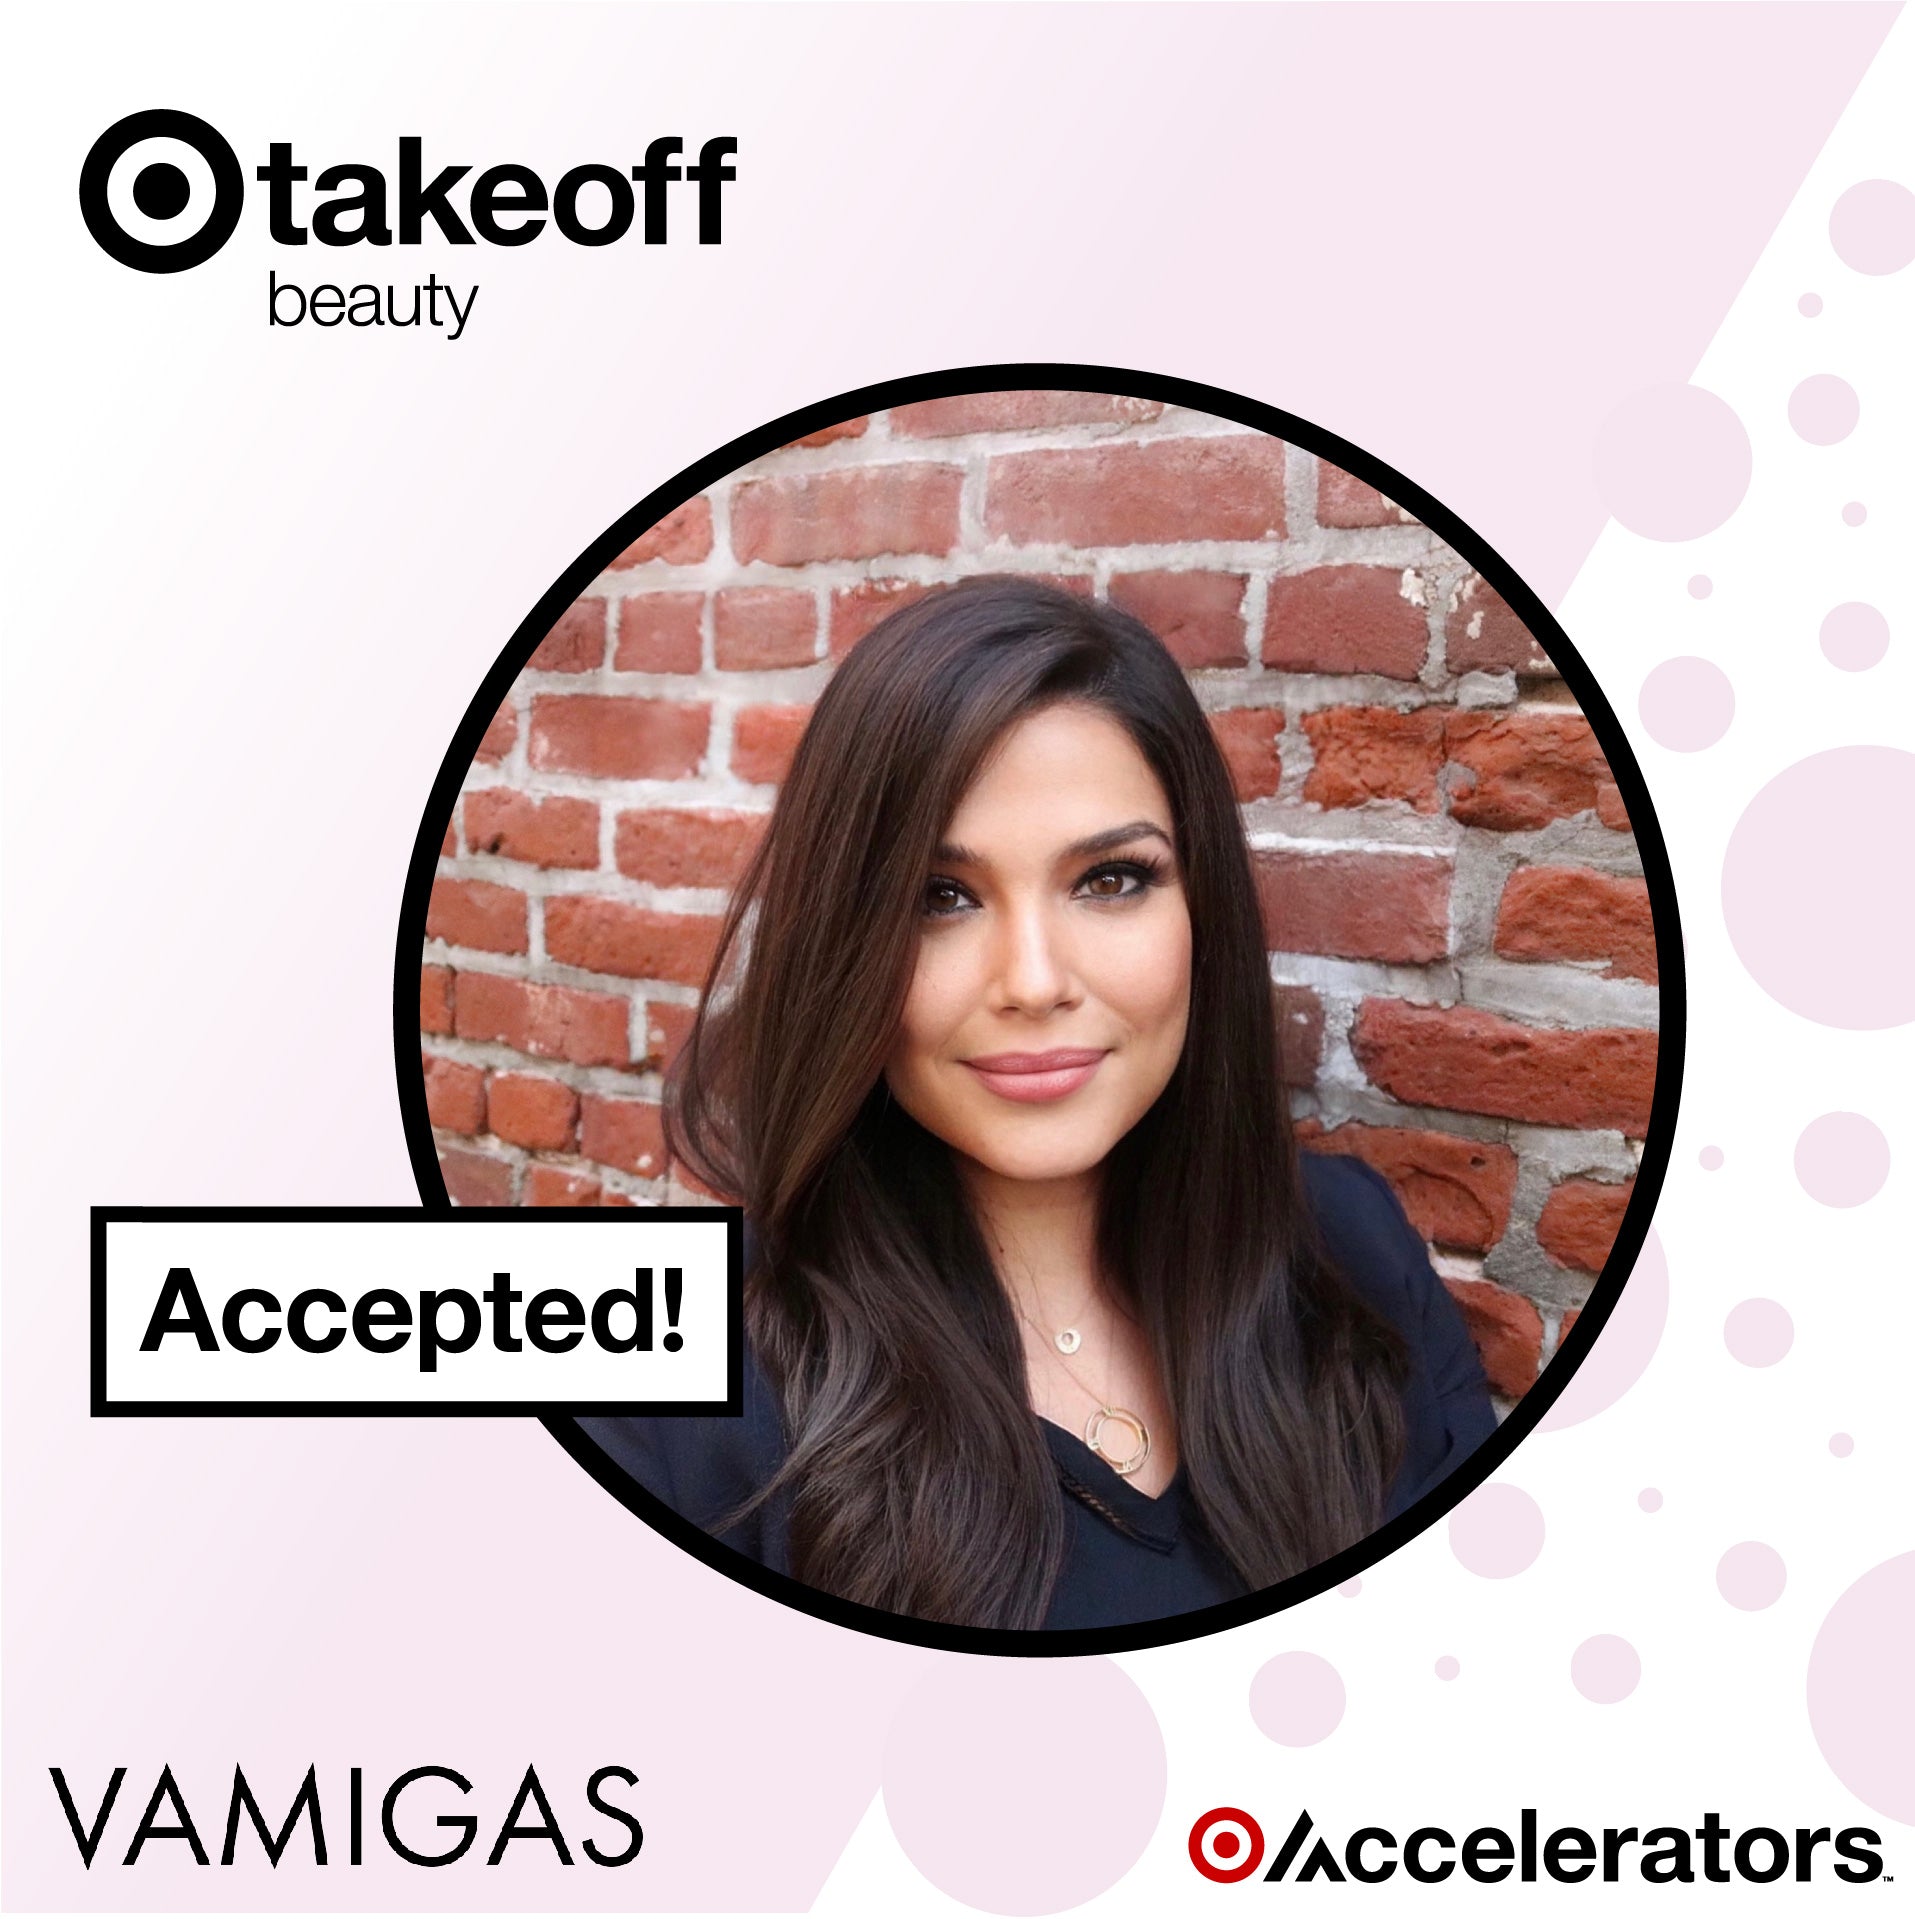 VAMIGAS Part of the 2022 Target Takeoff Beauty Cohort